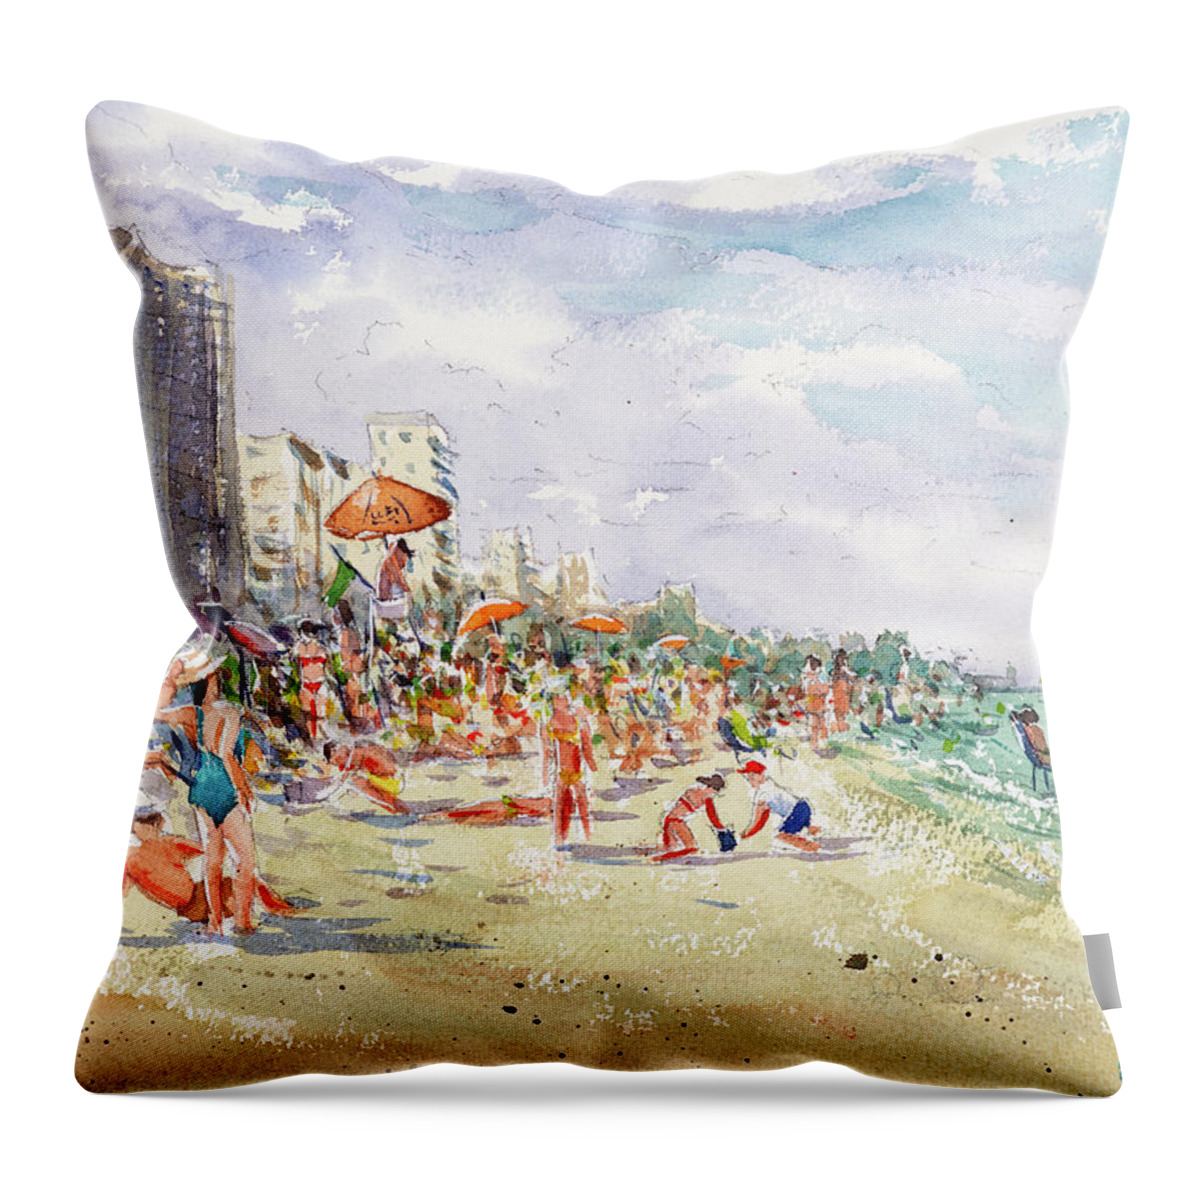 Myrtle Beach Throw Pillow featuring the painting Myrtle Beach by Tesh Parekh